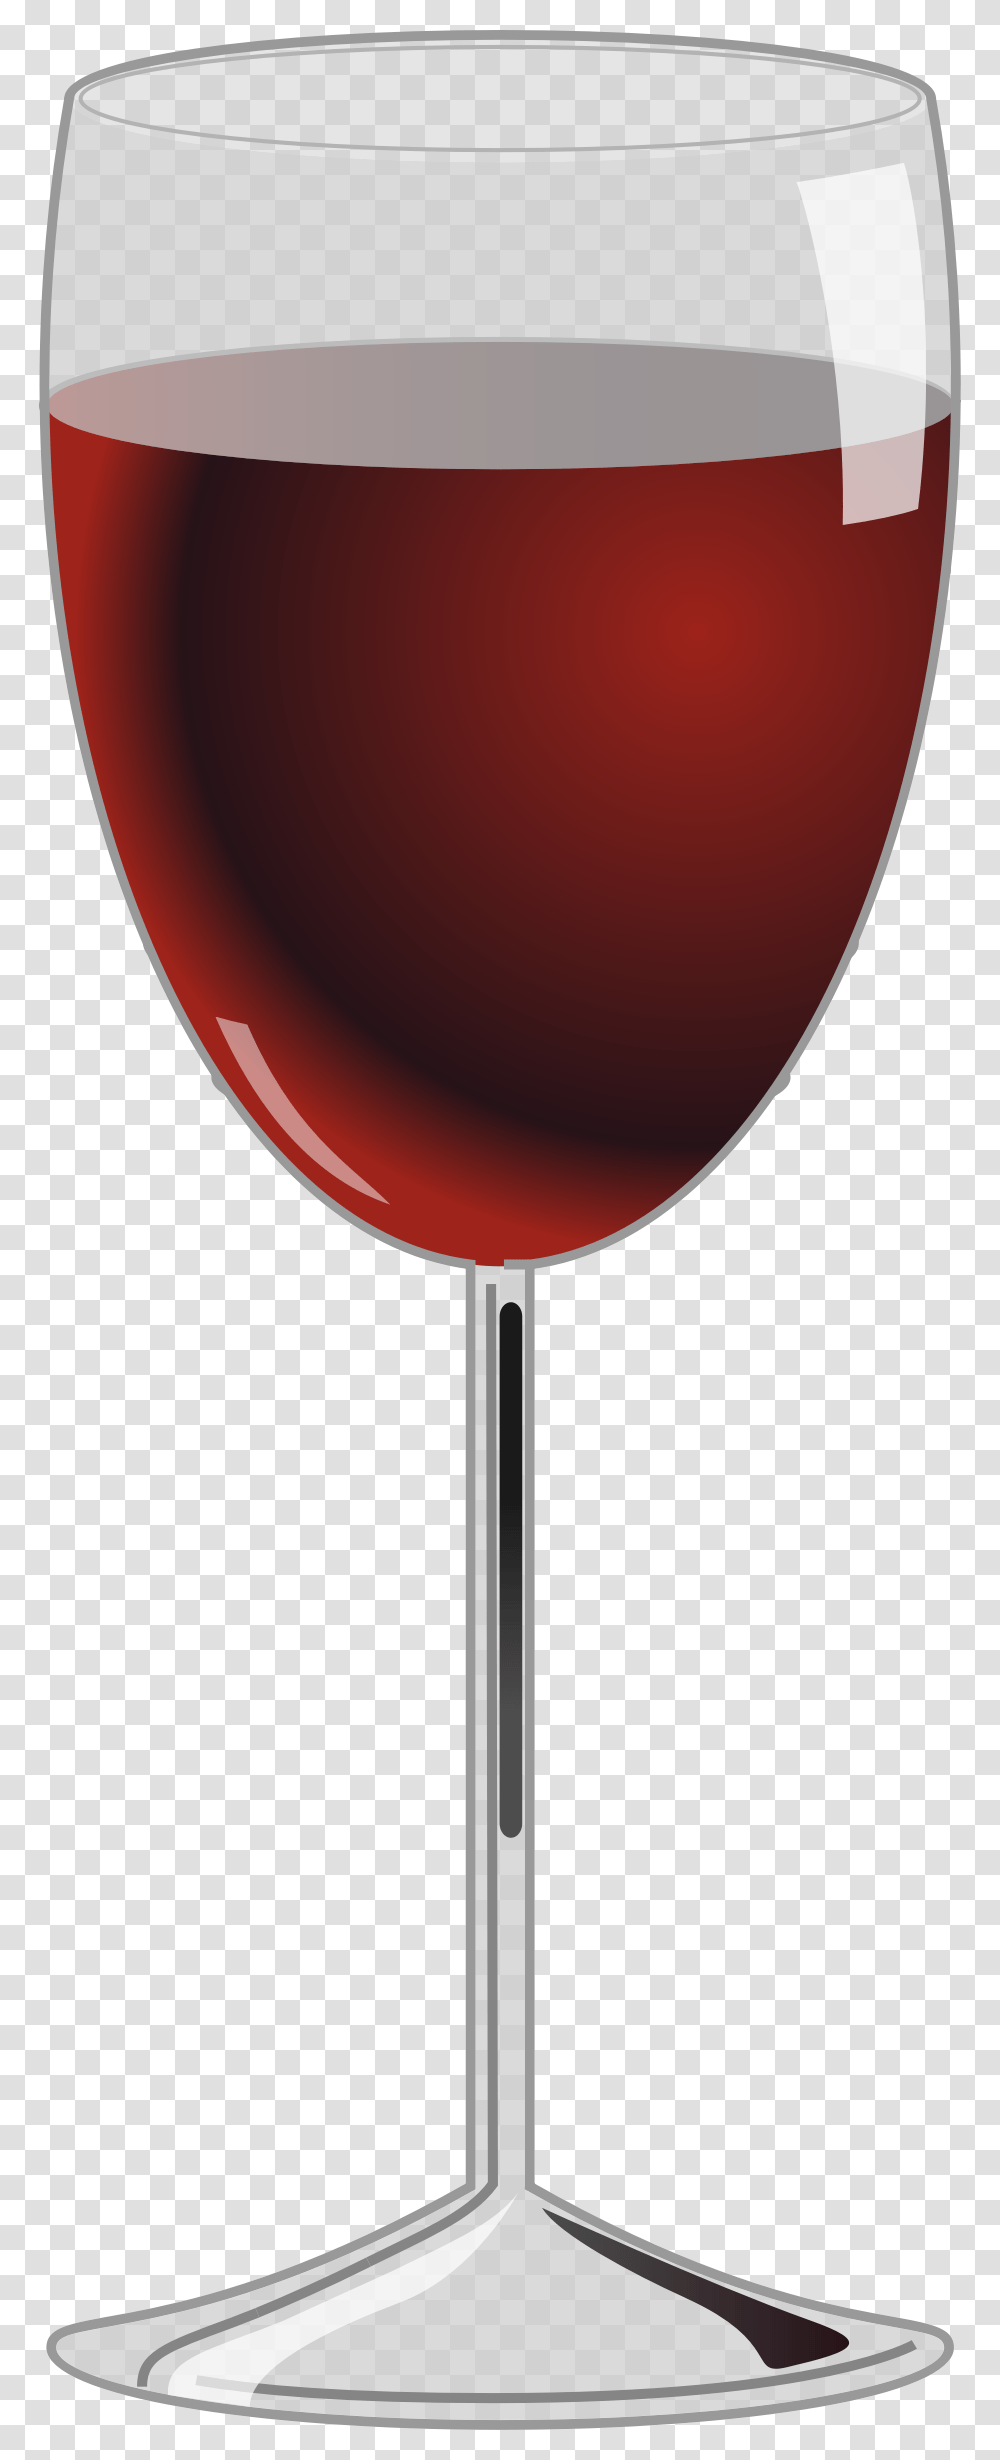 Alcohol Glass Red Wine, Lamp, Beverage, Drink, Wine Glass Transparent Png